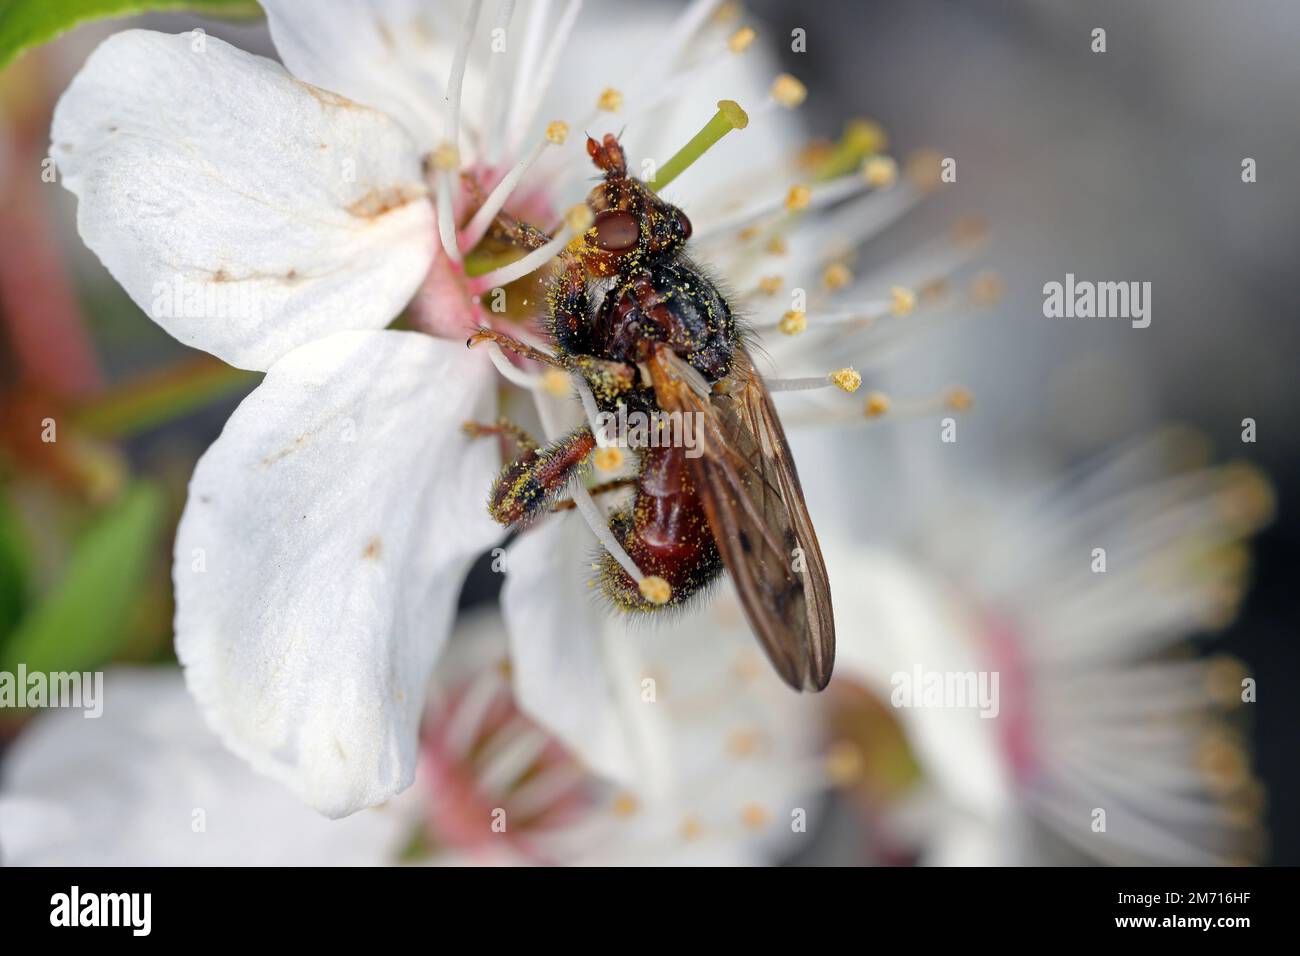 Myopa testacea conopid fly. Brown fly that hunts and paralyzes bees, in the family Conopidae. An insect that feeds on the pollen of mirabelle plum. Stock Photo